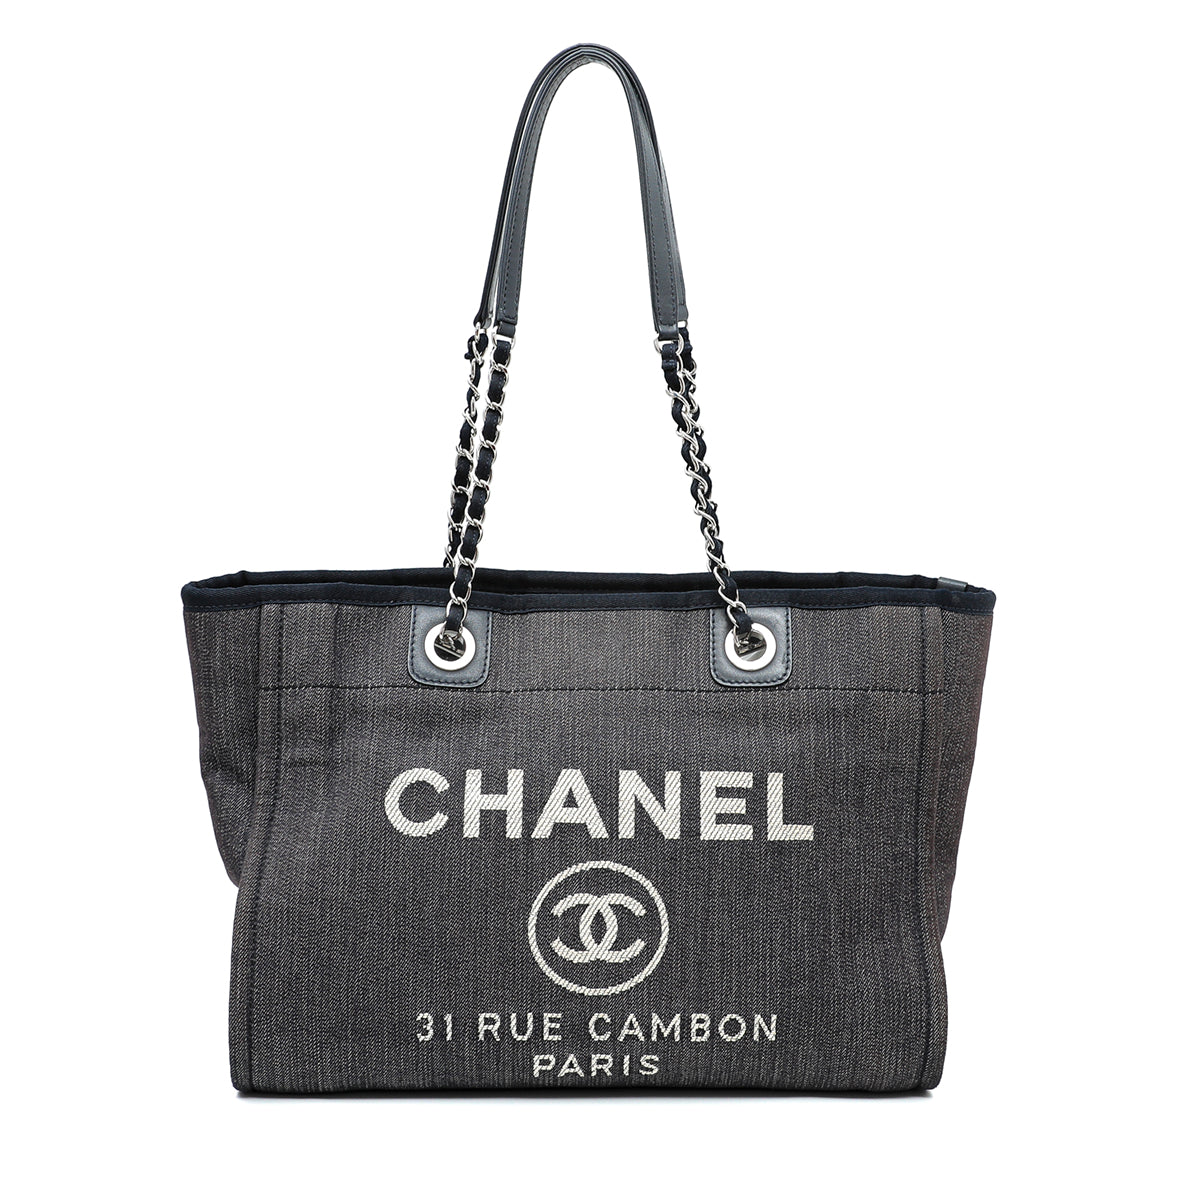 Chanel Denim Blue Deauville Shopping Tote Bag